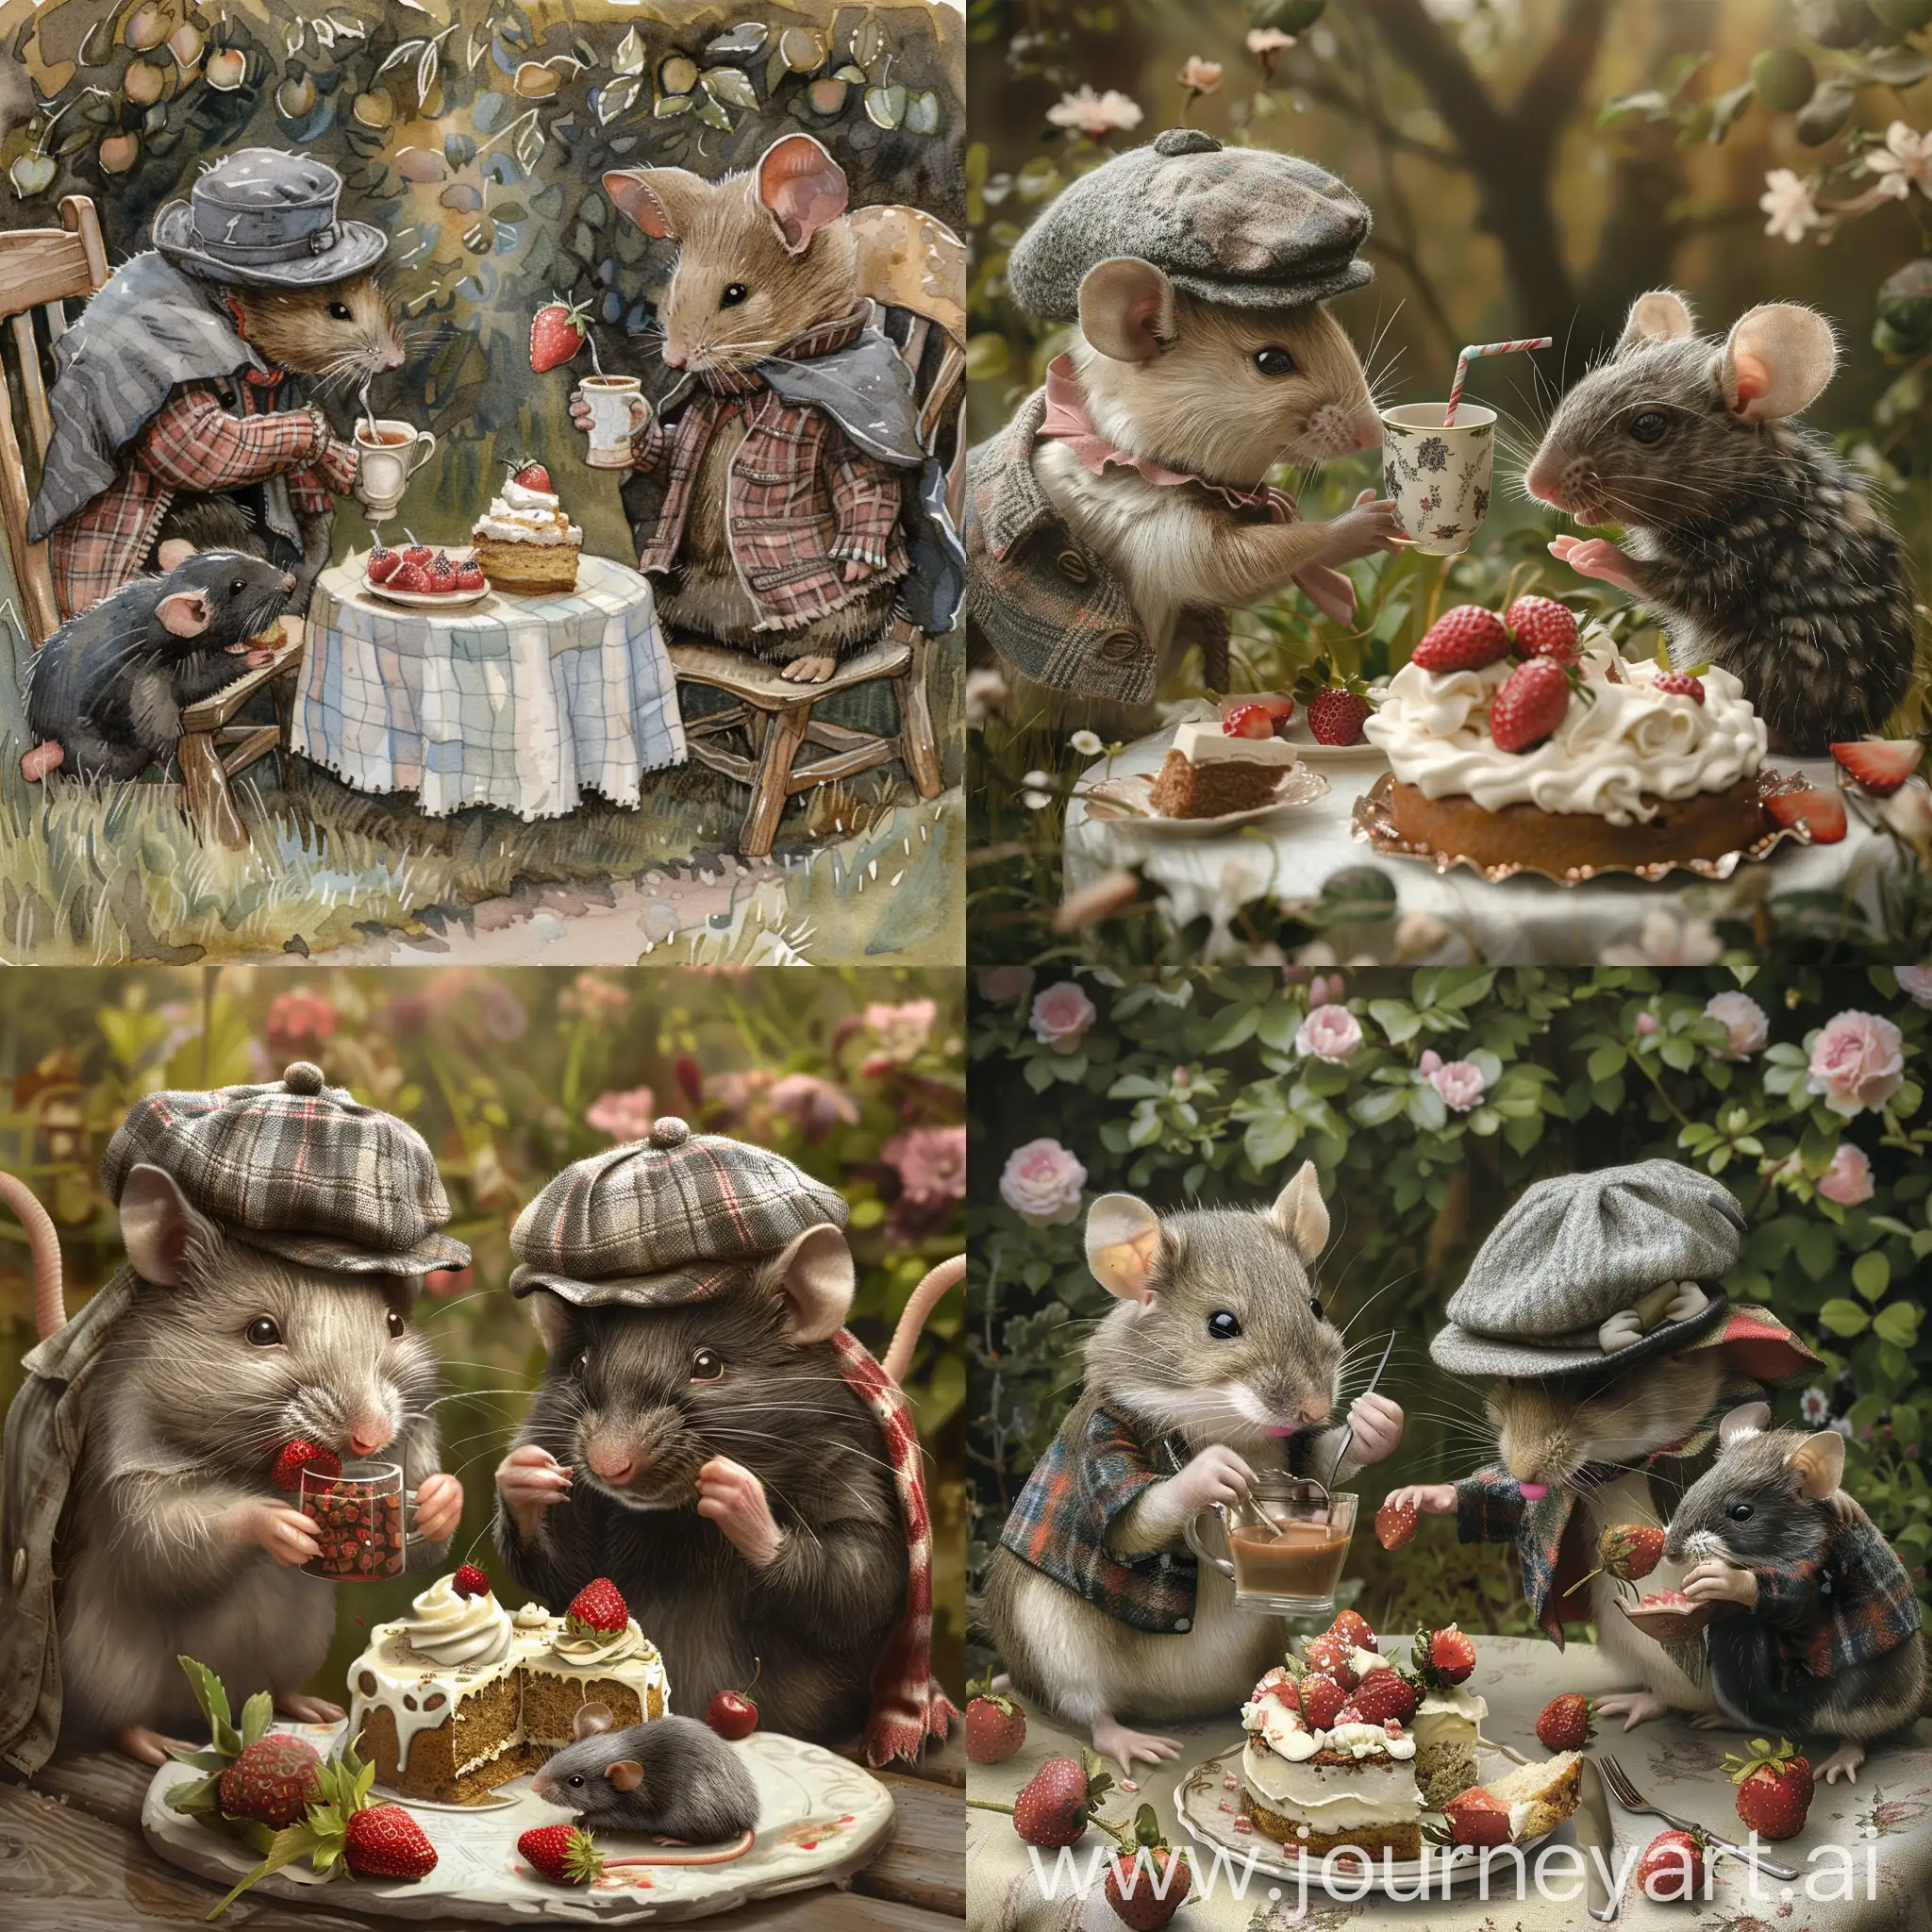 Animals-in-Beatrix-Potter-Style-Piglet-Baby-Girl-Rat-and-Baby-Boy-Mole-Enjoying-Cacao-and-Cake-in-Idyllic-Garden